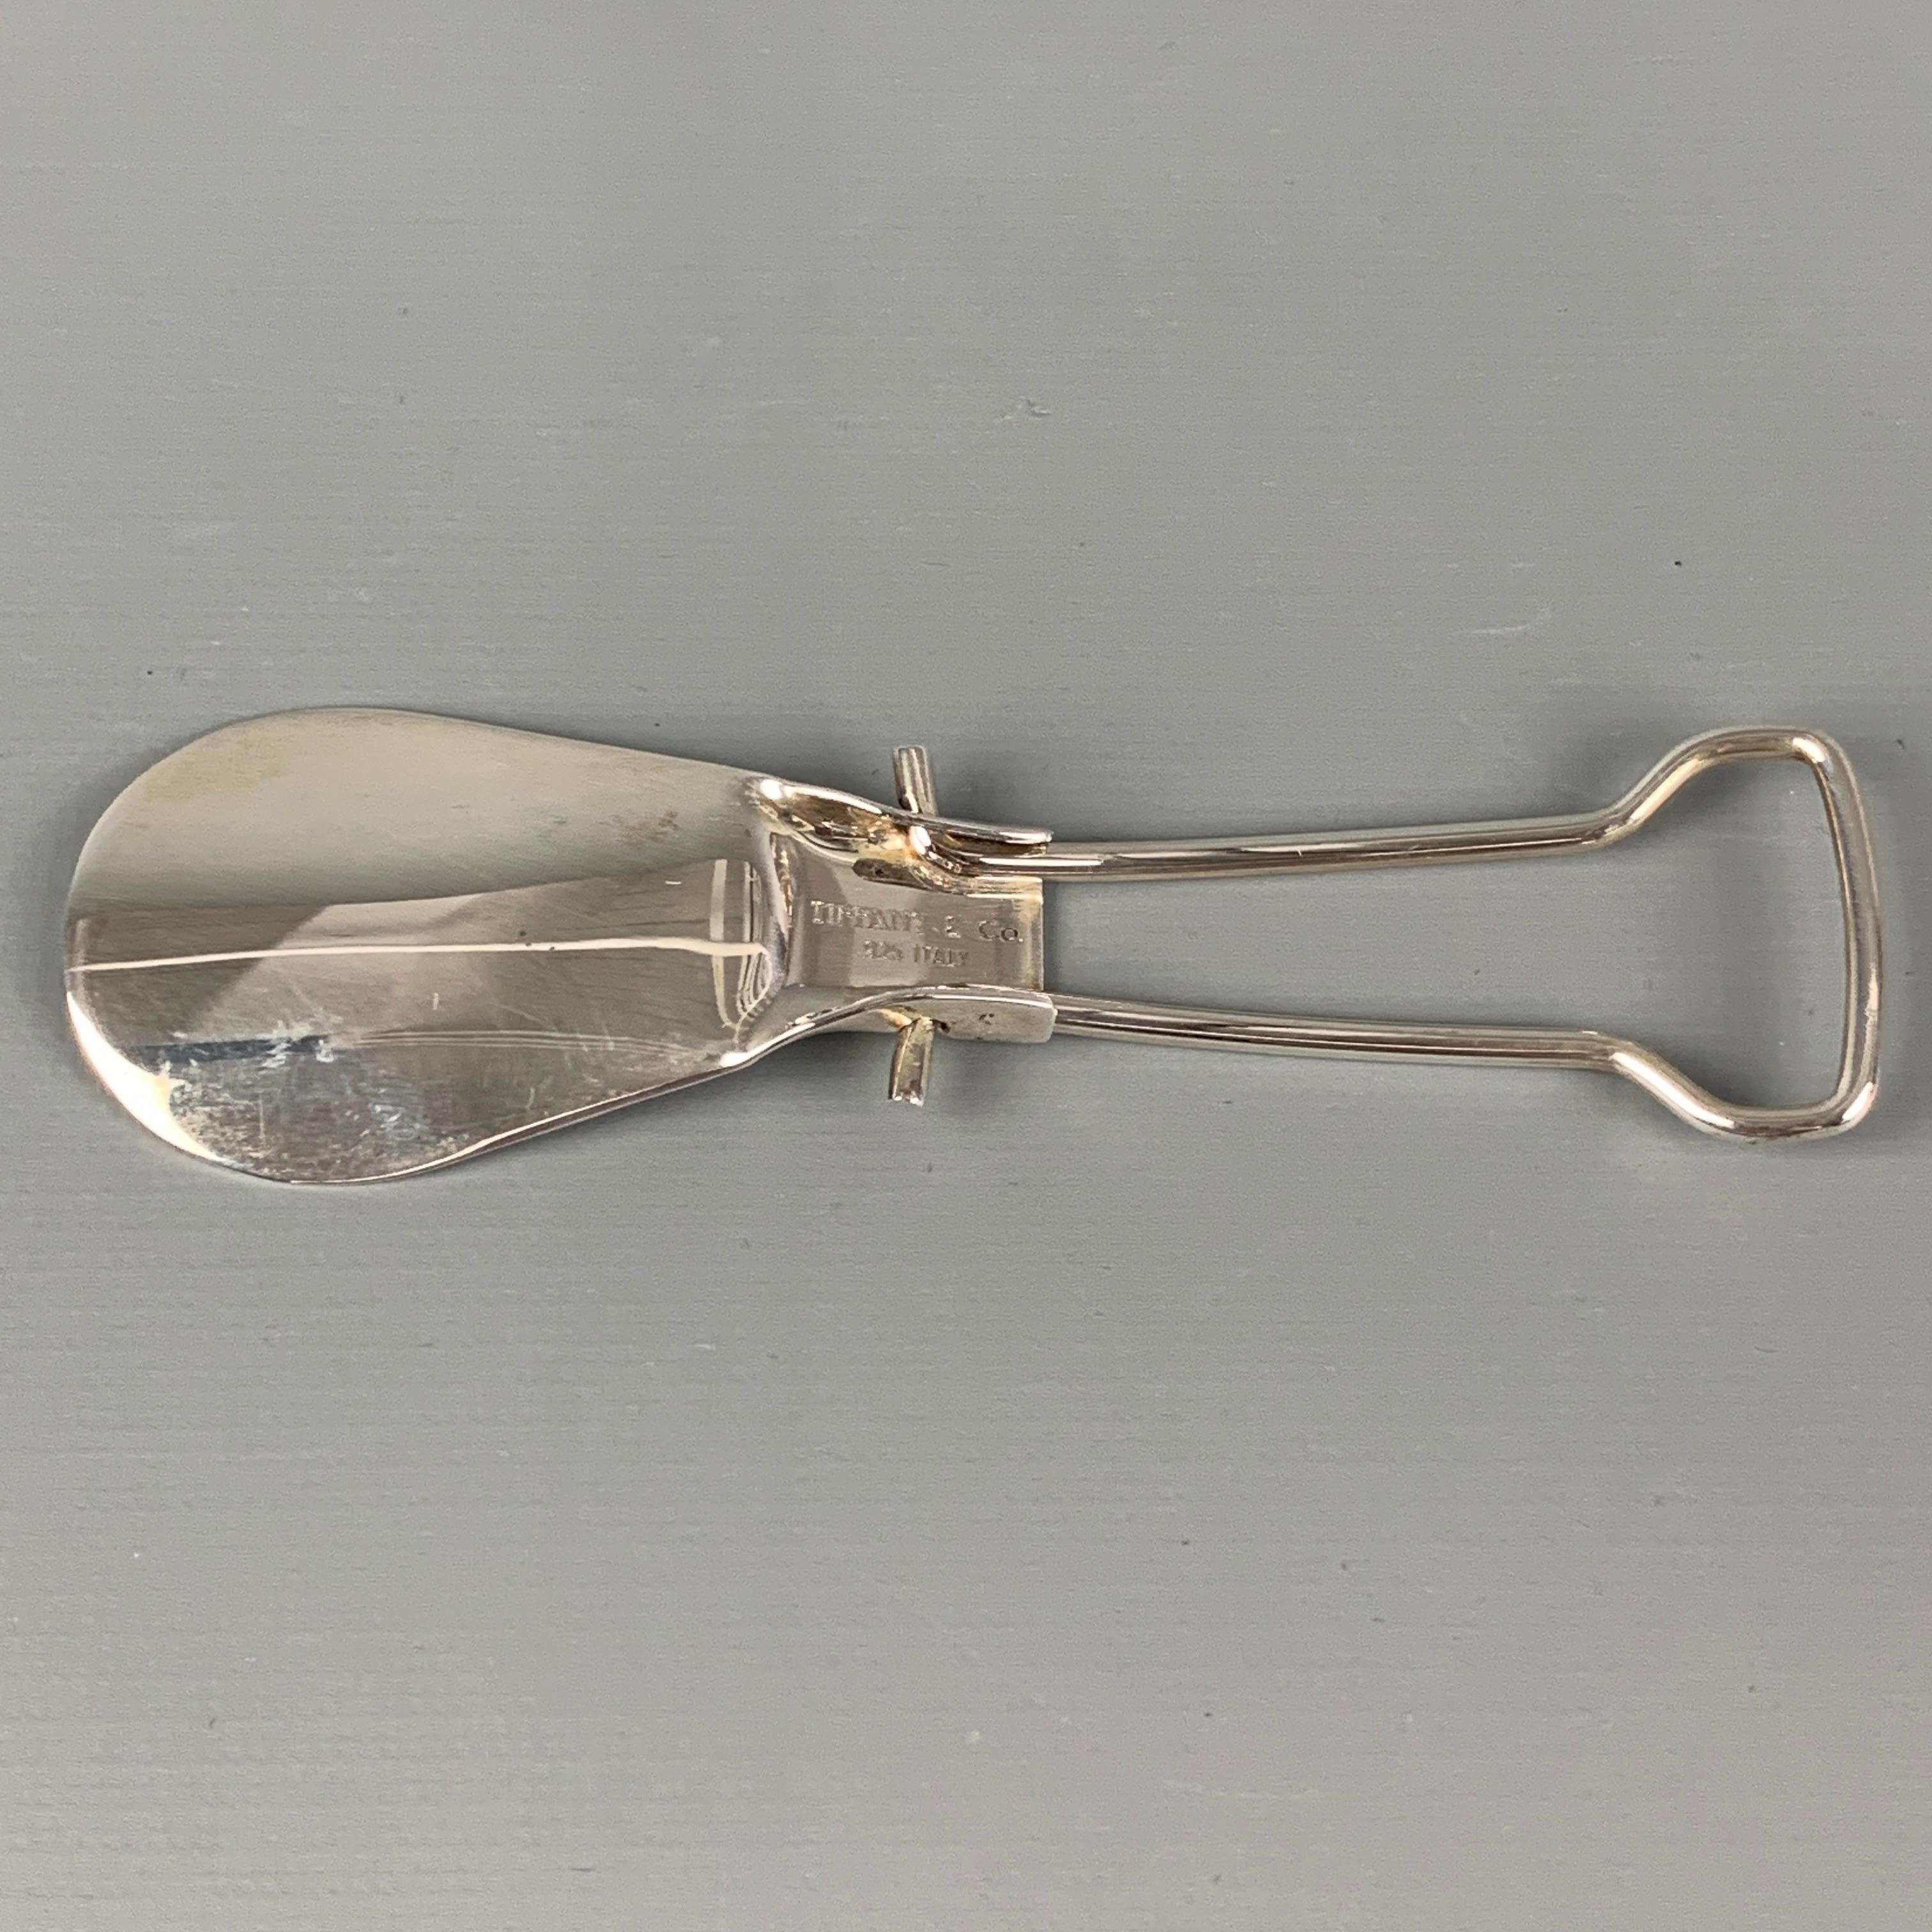 Vintage TIFFANY & CO. folding shoe horn comes in a sterling silver and includes original pouch. 

Very Good Pre-Owned Condition.
Original Retail Price: $320.00

Measurements:

Length: 4.75 in.
Height: 1.5 in. 